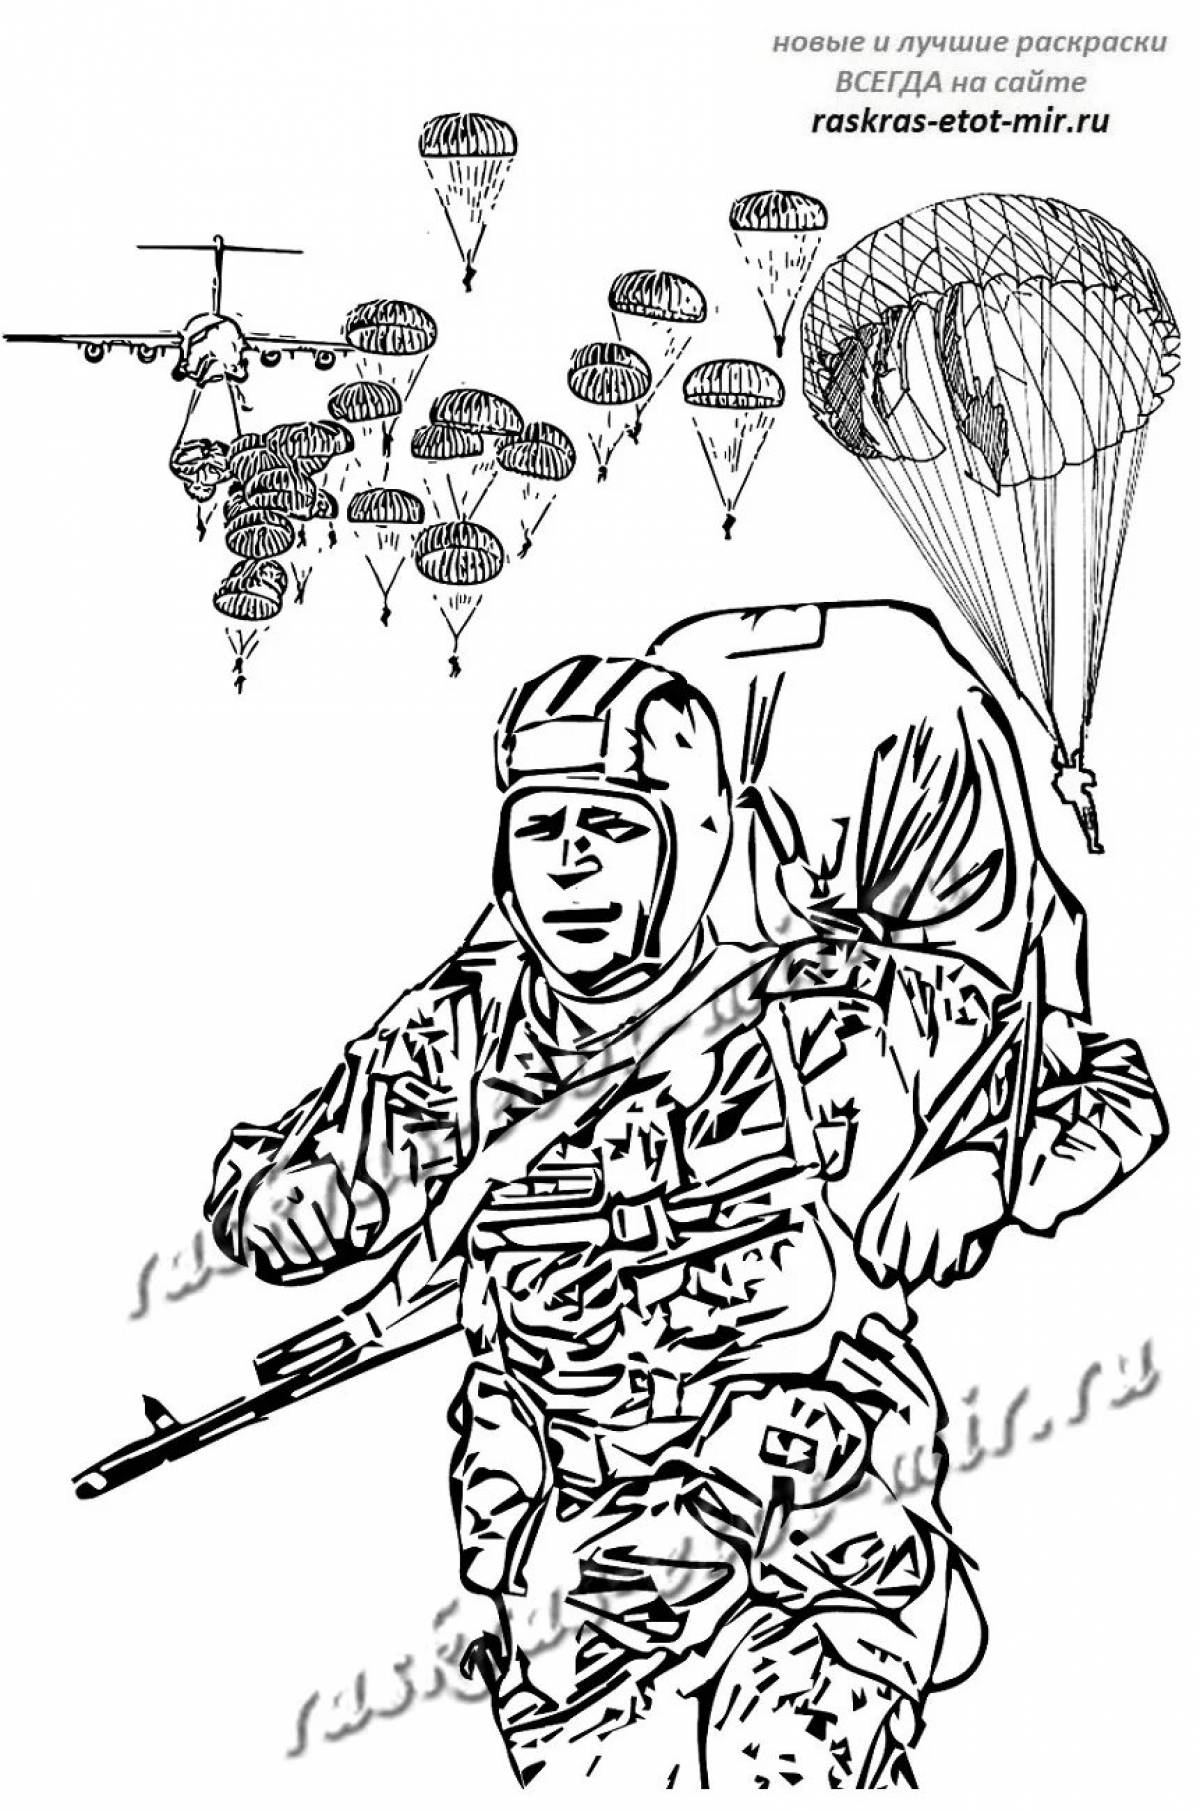 Irresistible paratrooper coloring page for kids